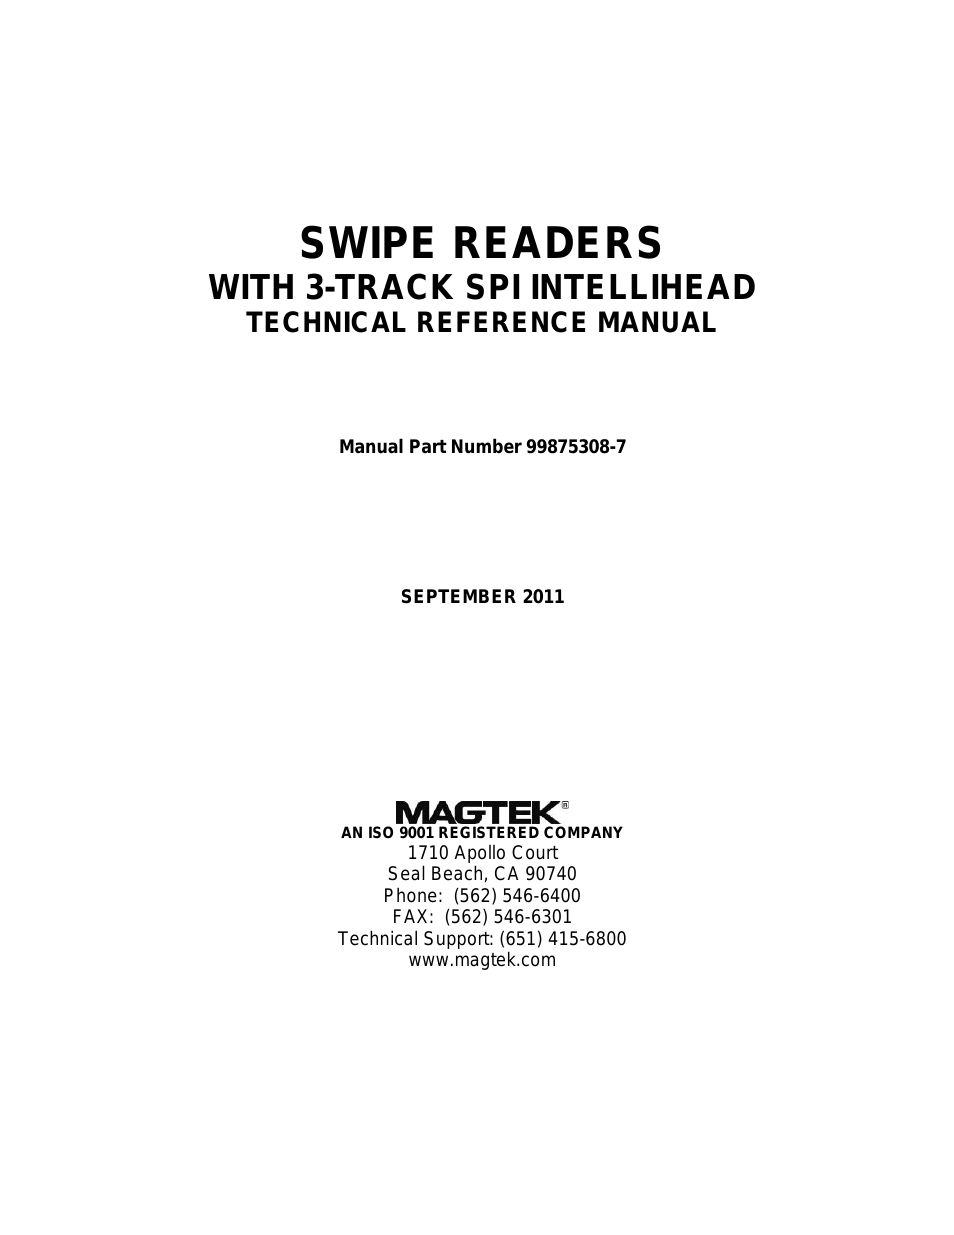 SWIPE READERS WITH 3-TRACK